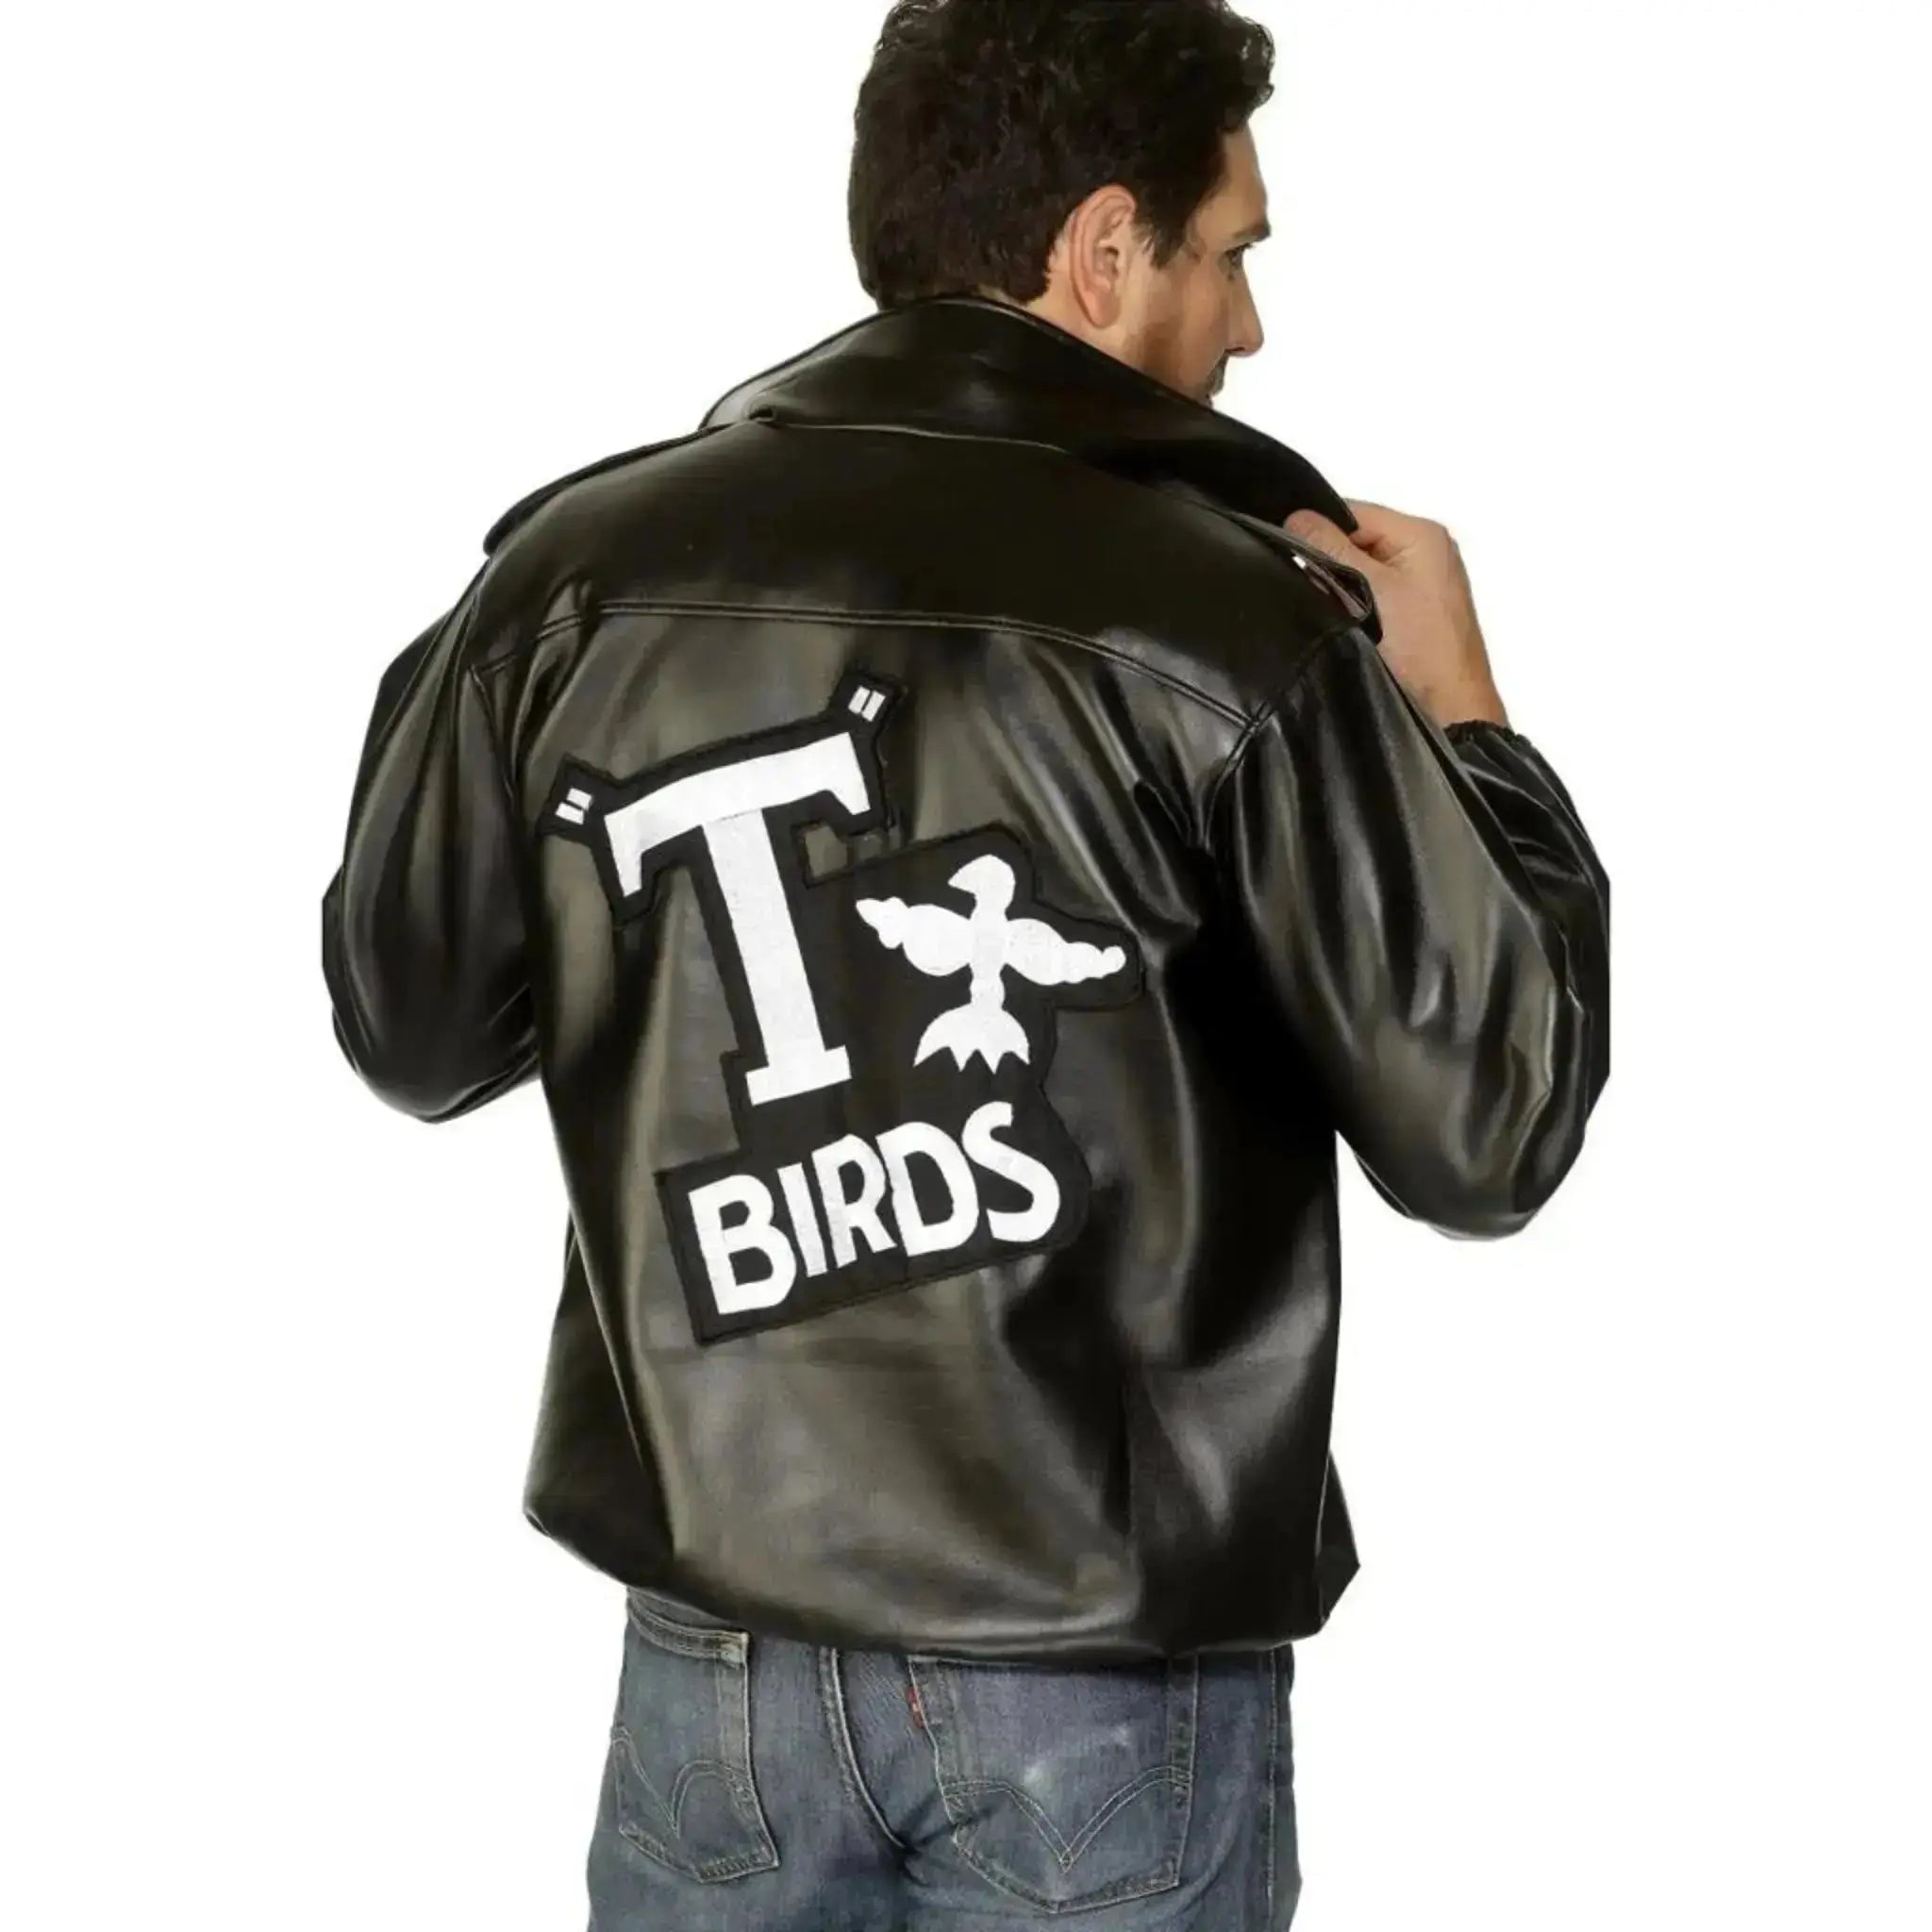 Grease T-bird Jacket | The Party Hut